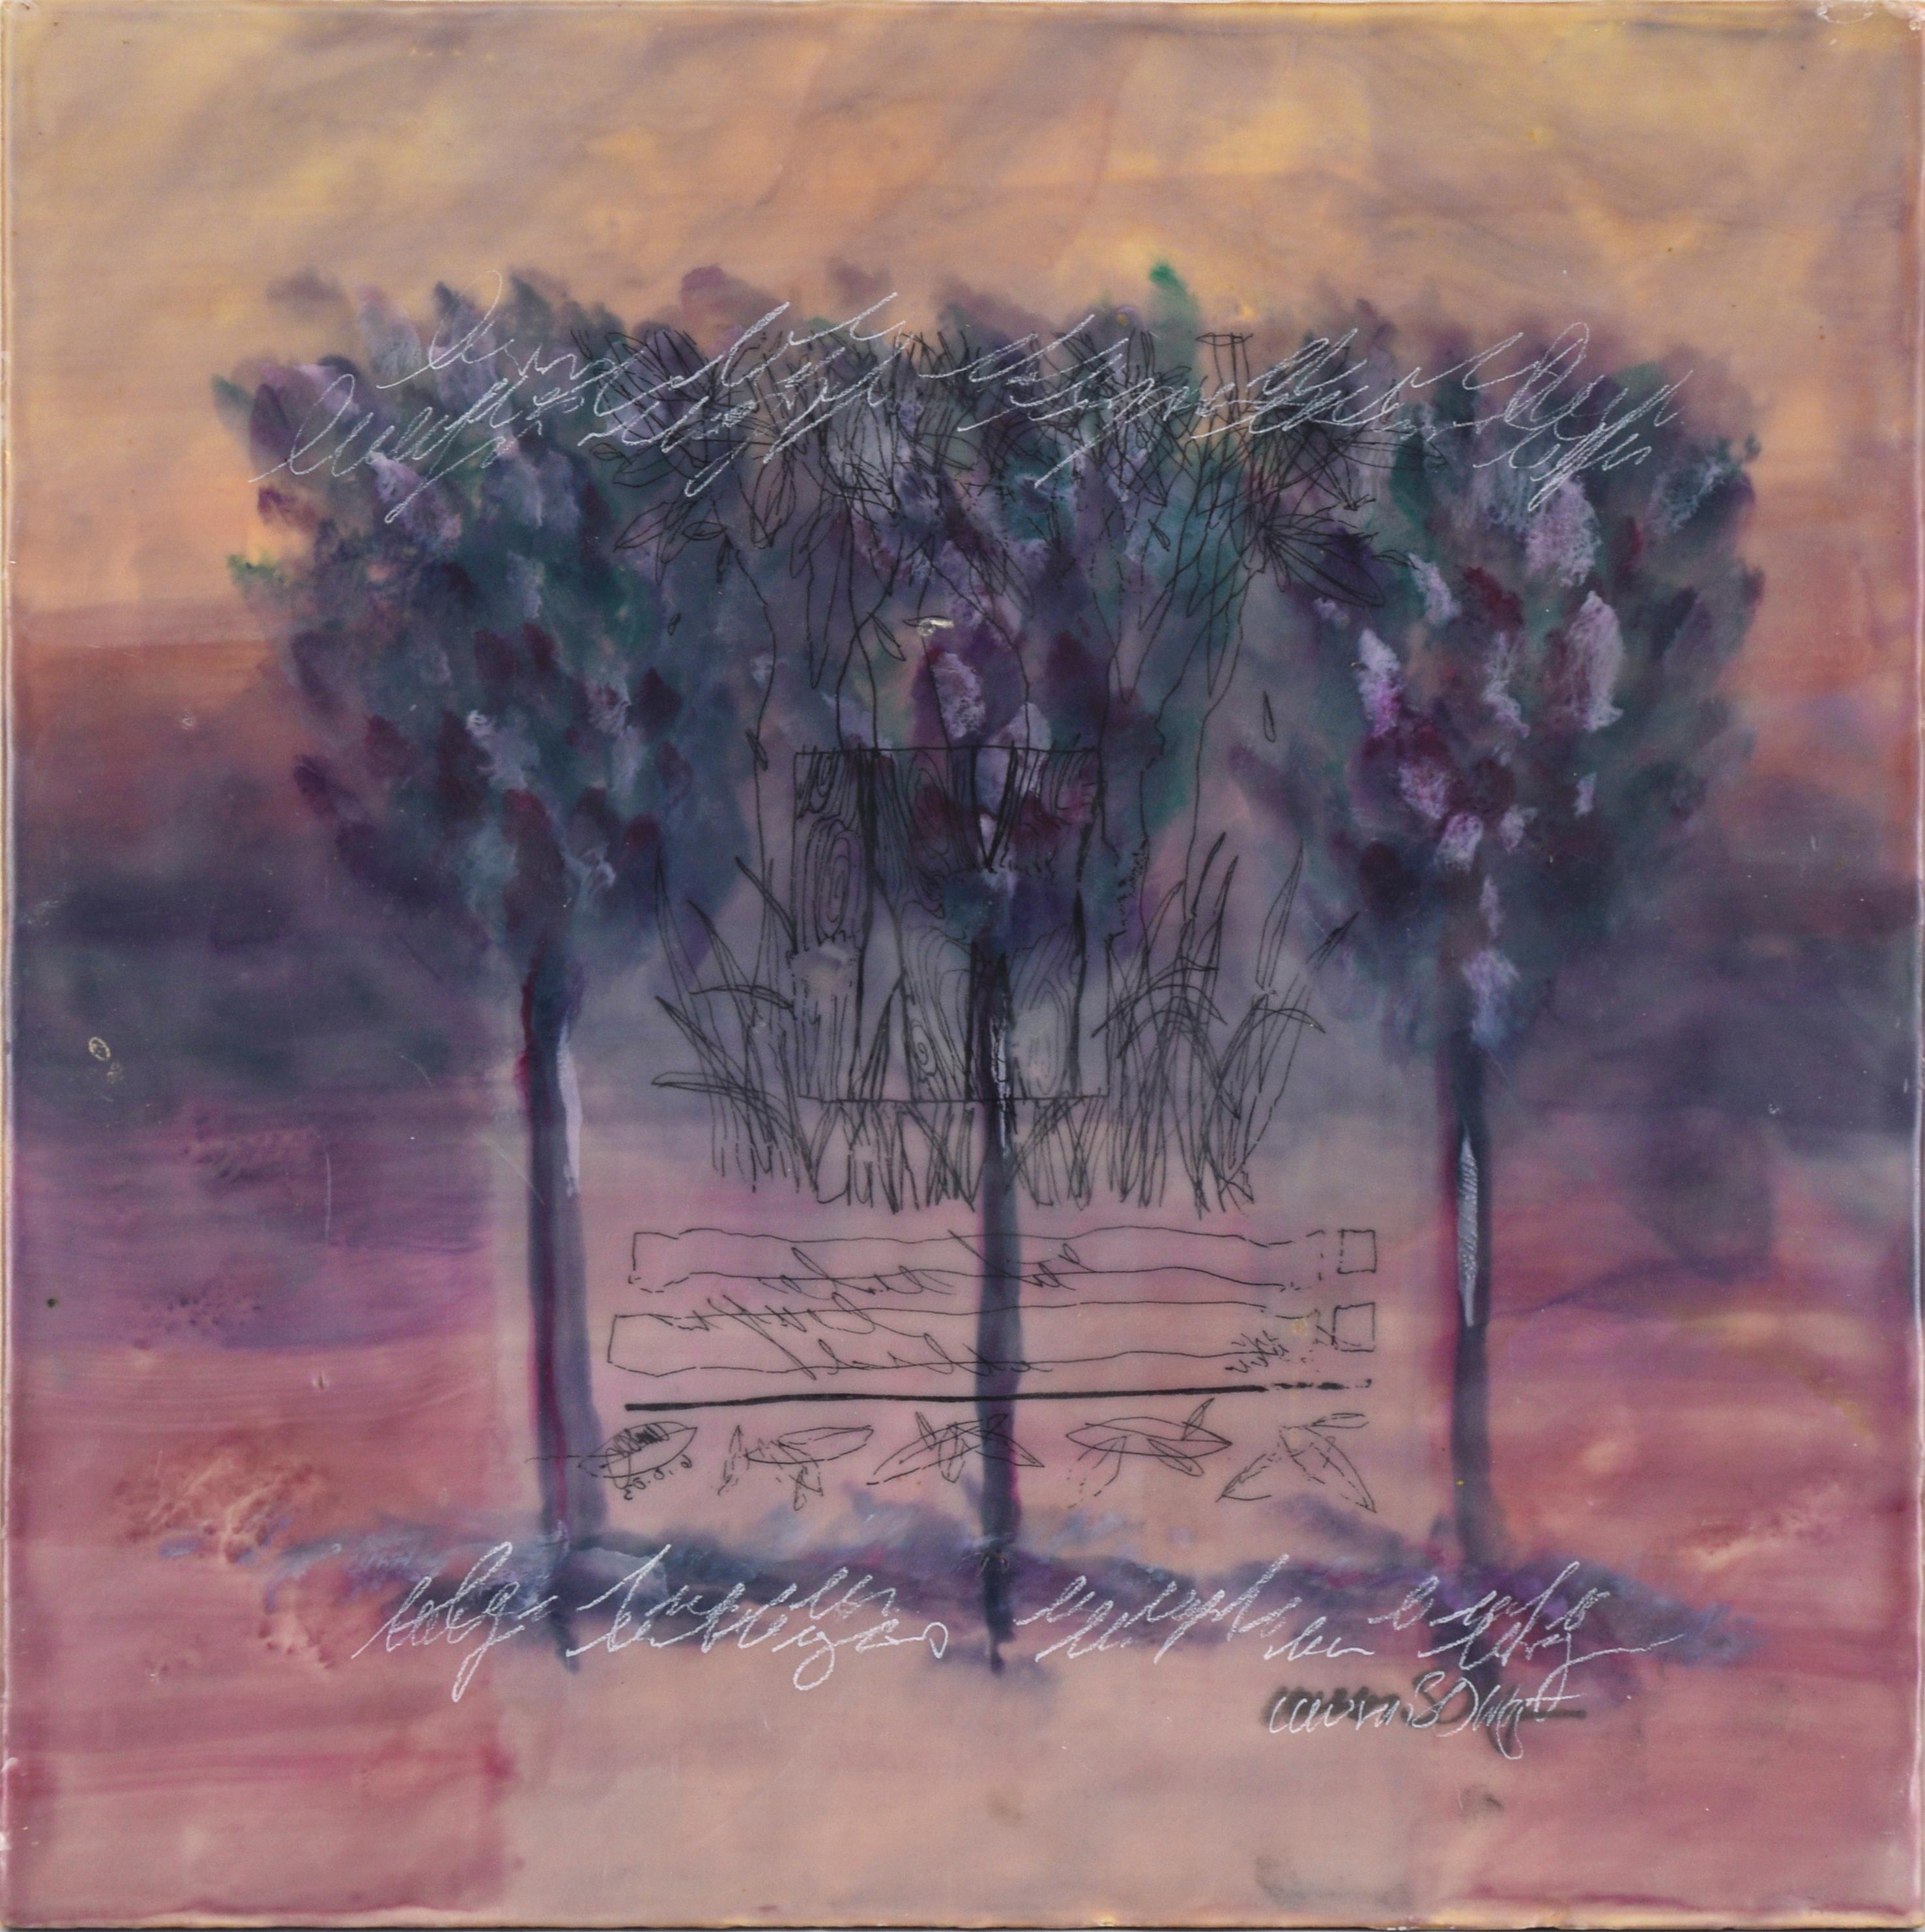 Lauren Ohlgren Landscape Painting - "She's Not There" II - Abstracted Landscape